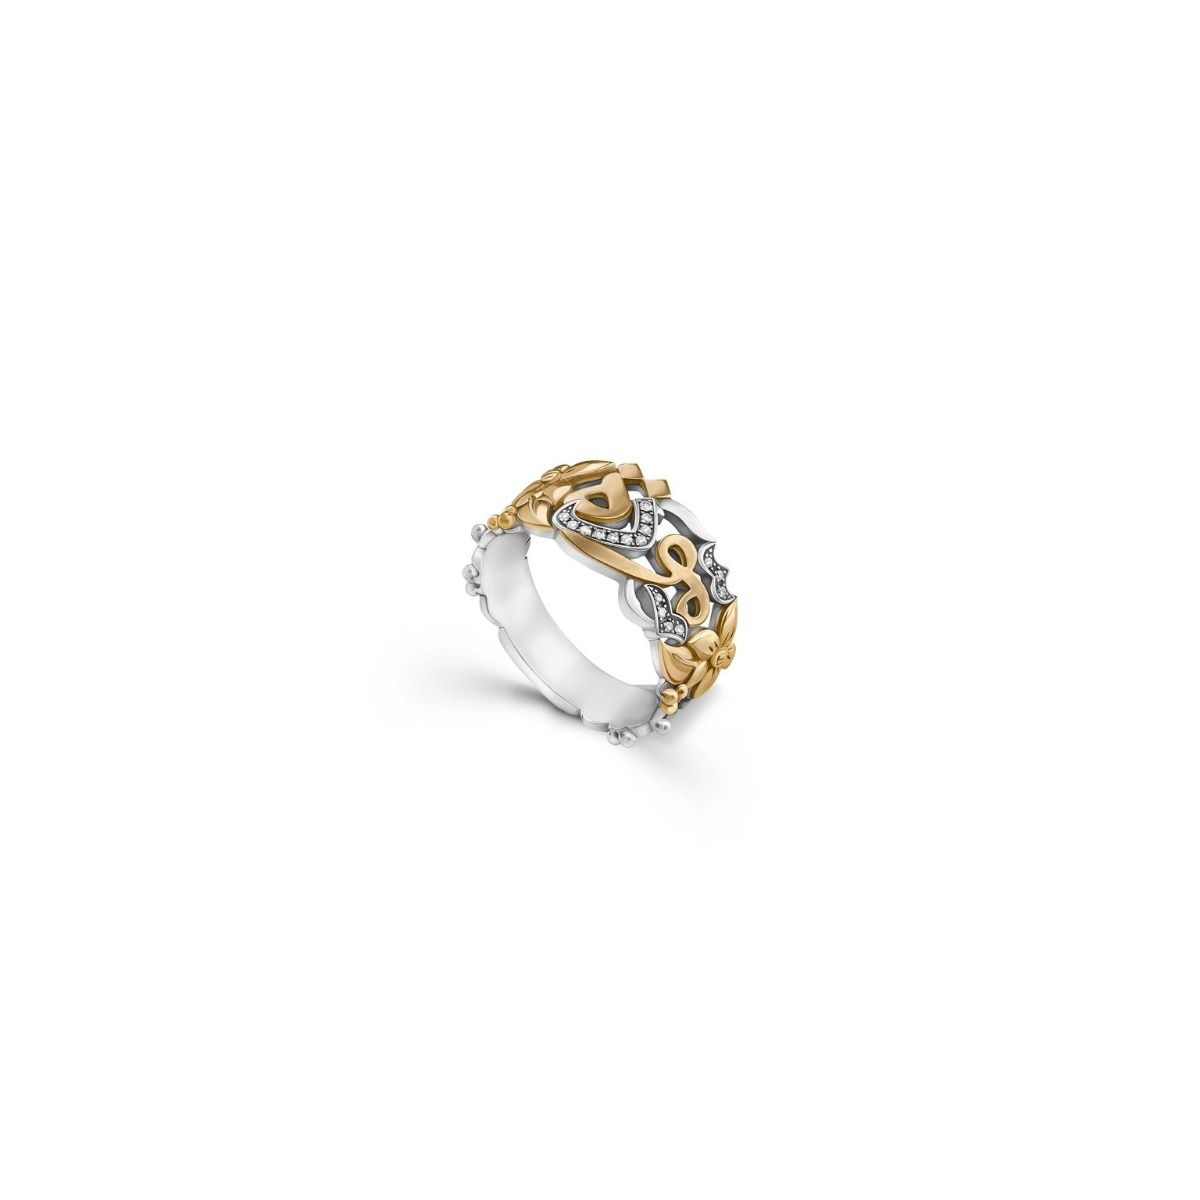 Endearment Ring by Azza Fahmy - Designer Rings